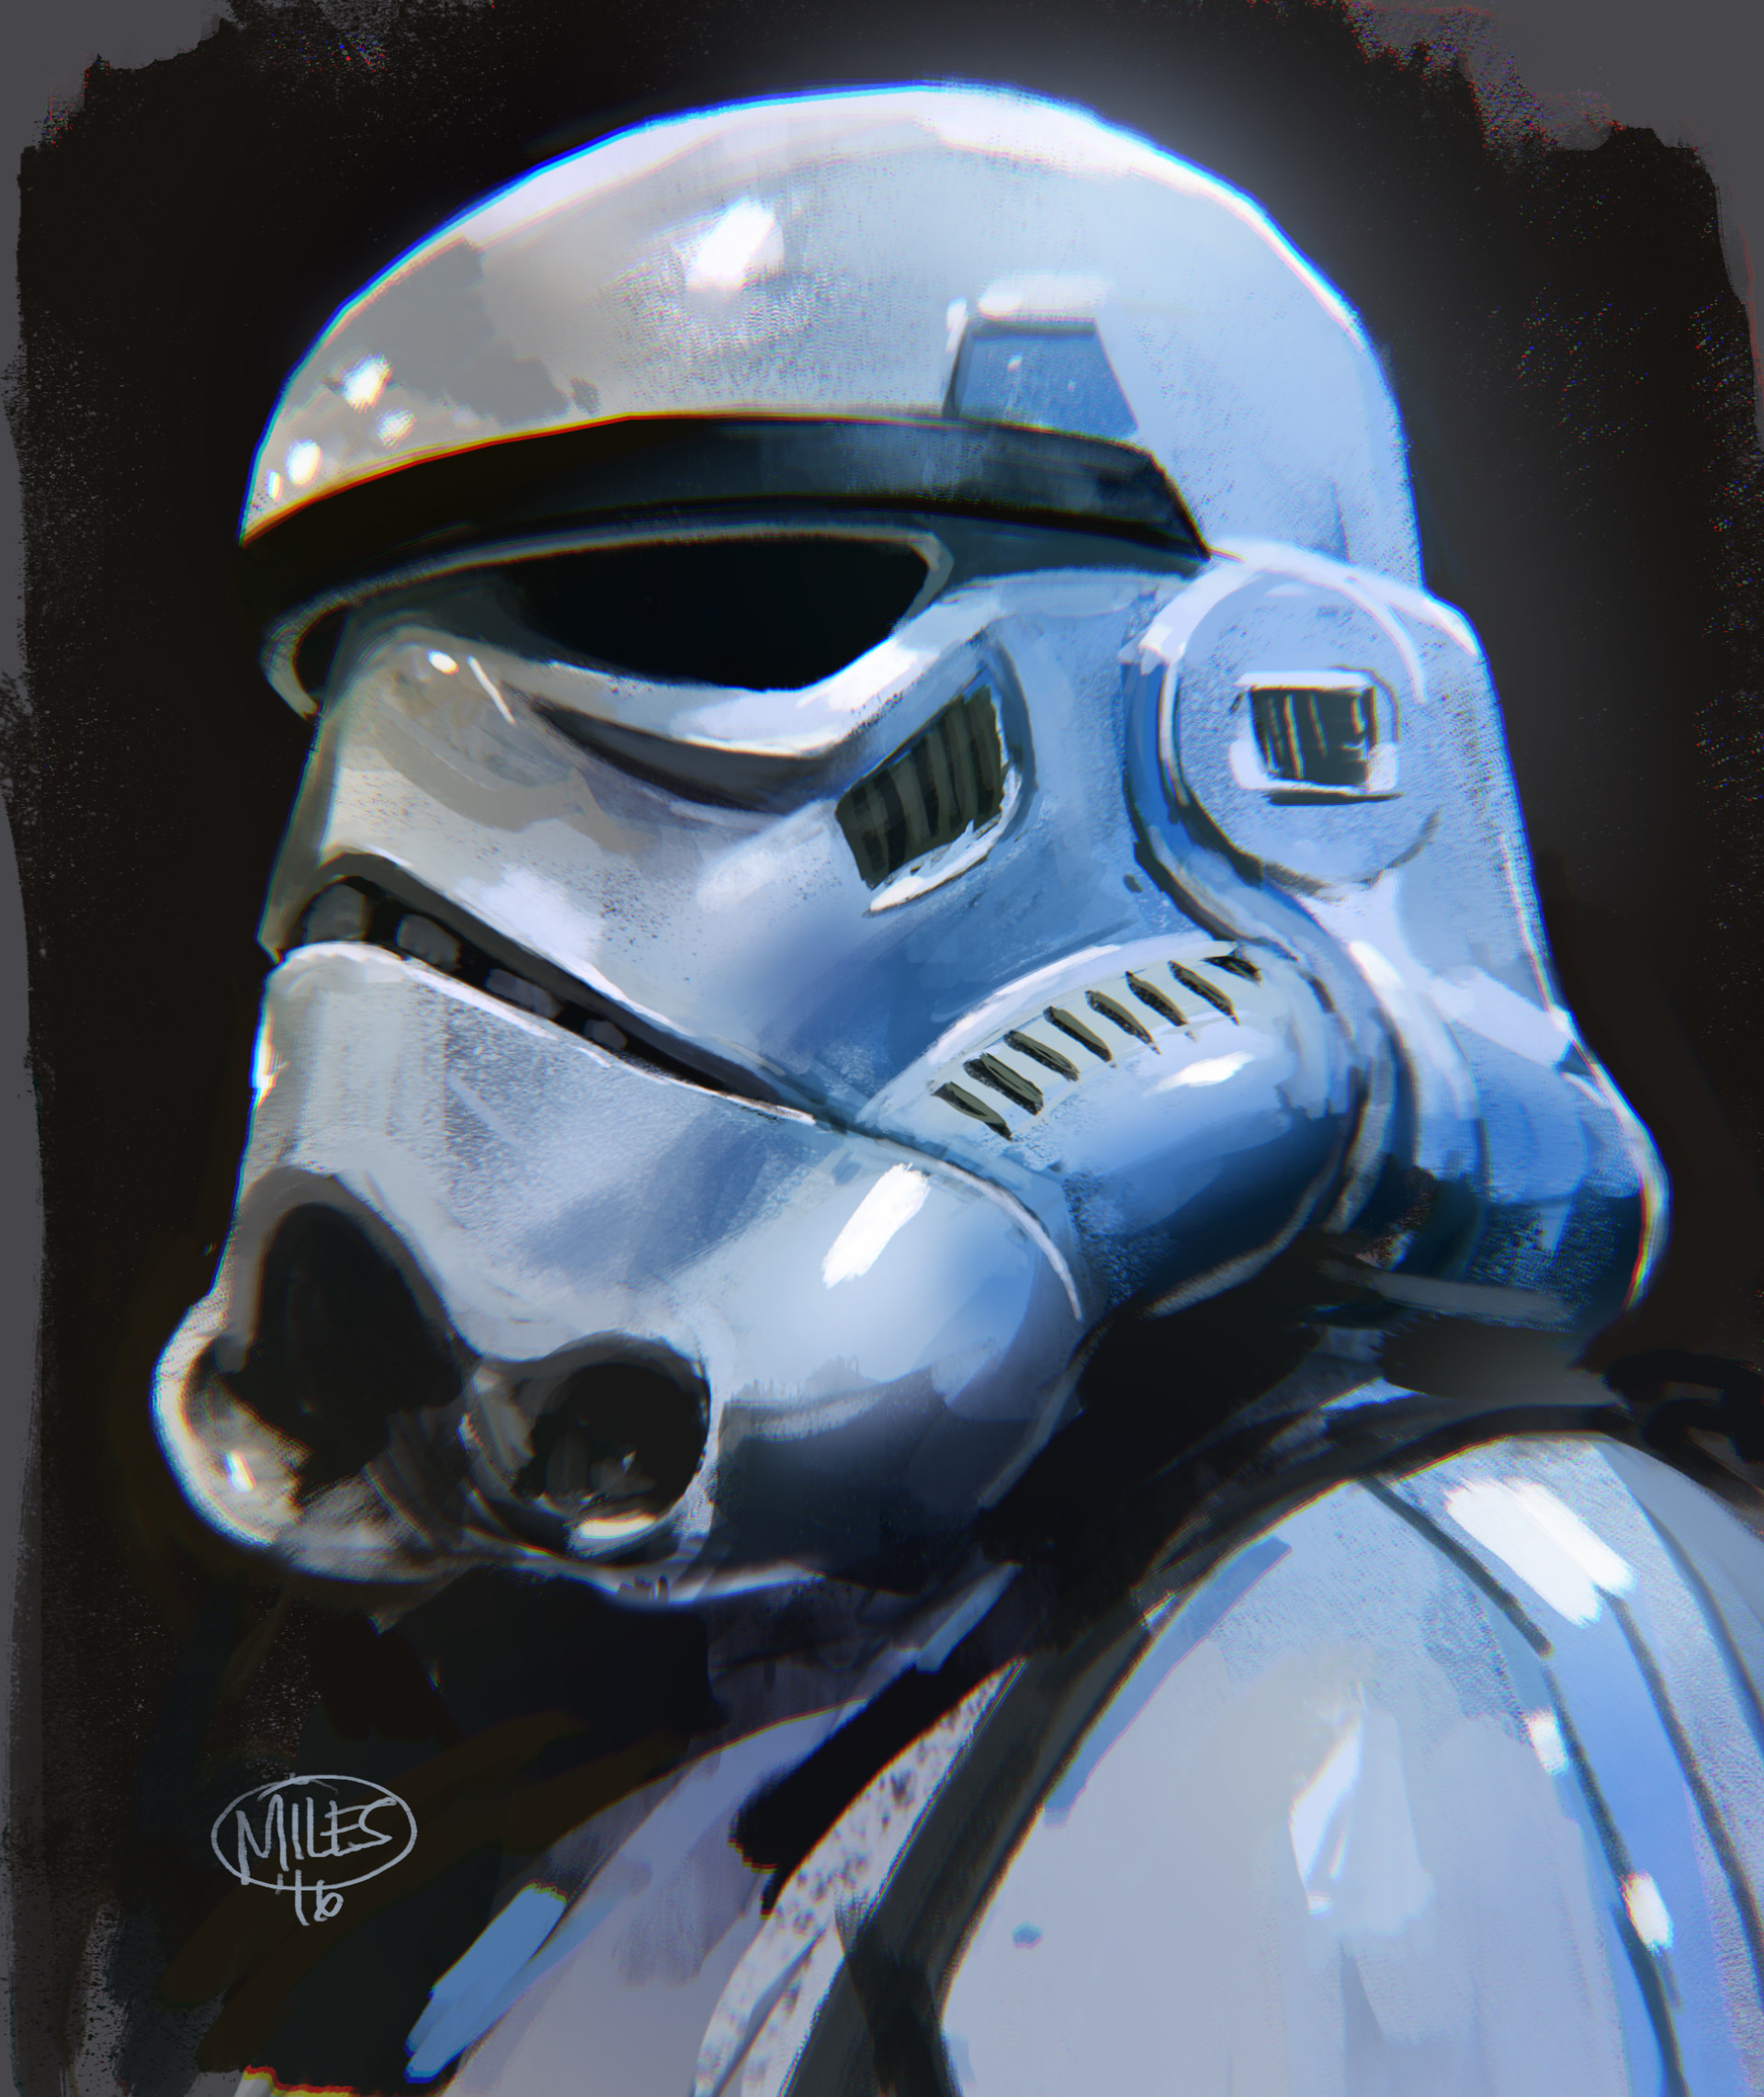 https://cdnb.artstation.com/p/assets/covers/images/003/131/075/large/miles-dulay-stormtrooper.jpg?1470084118